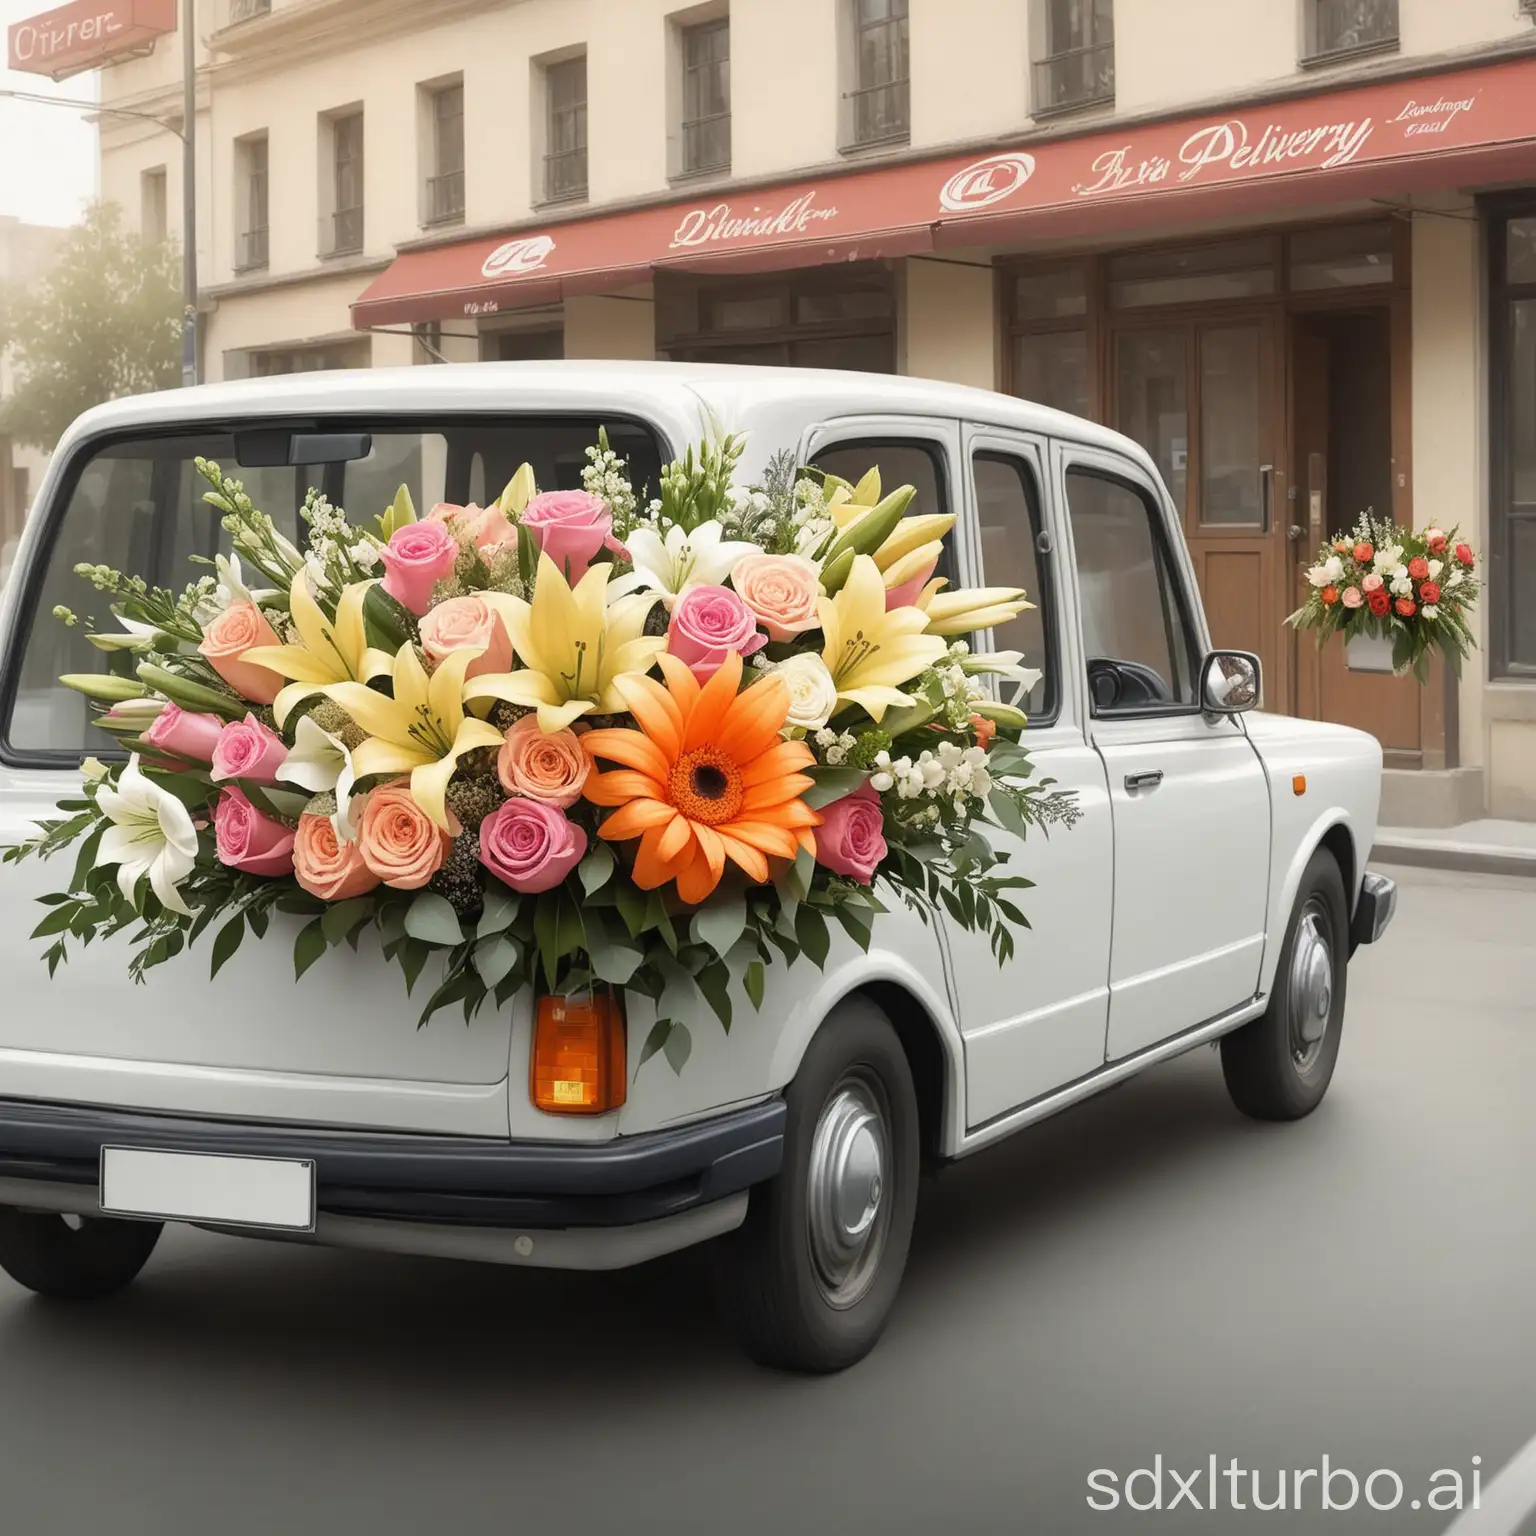 Flower-Delivery-Service-by-Car